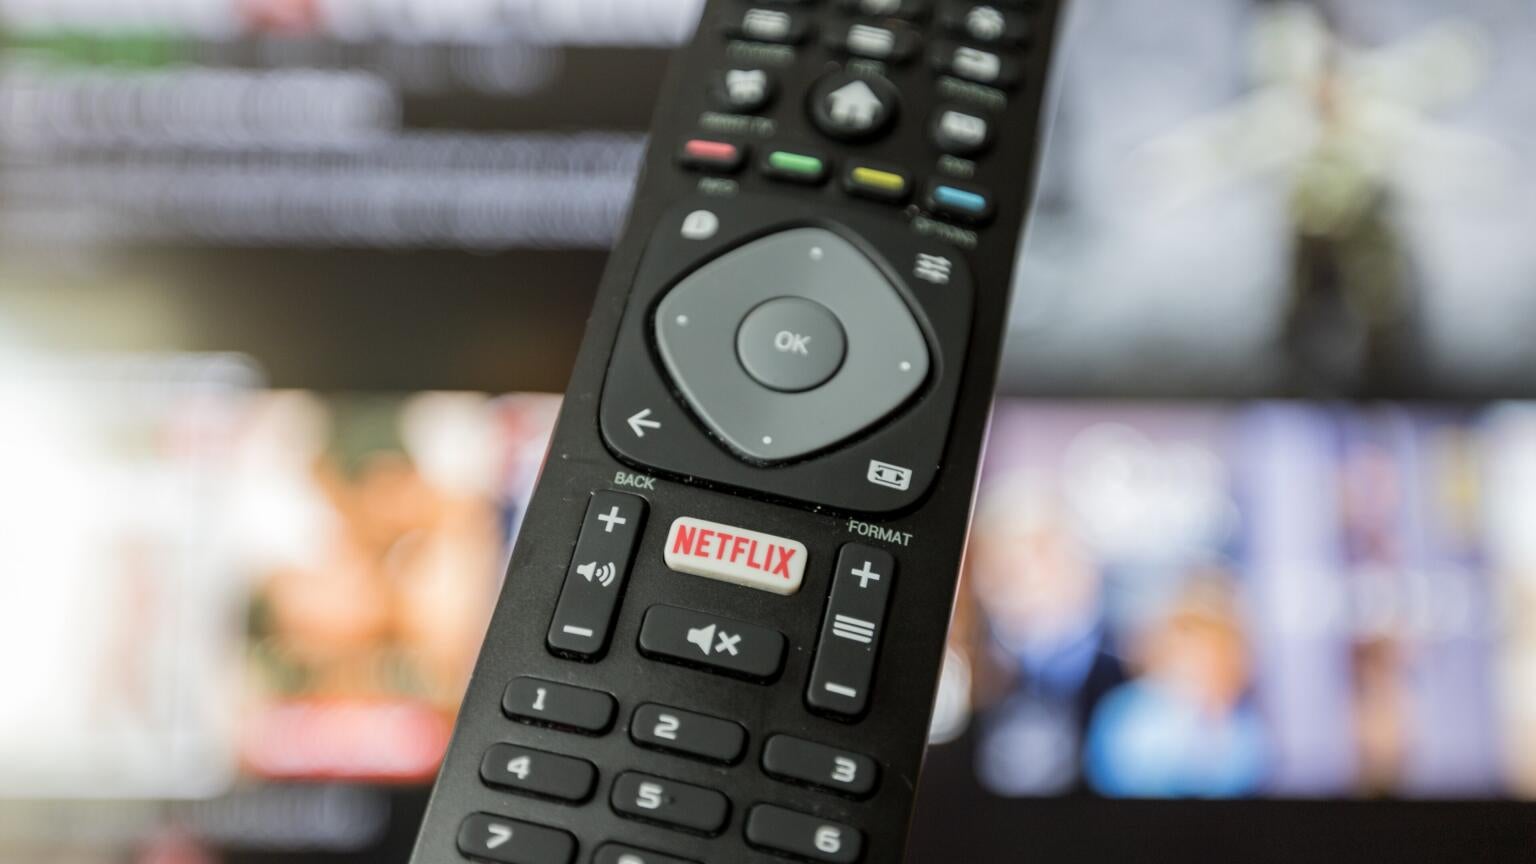 A new survey from SRG shows which TV and streaming brands are considered Must Keeps by viewers.